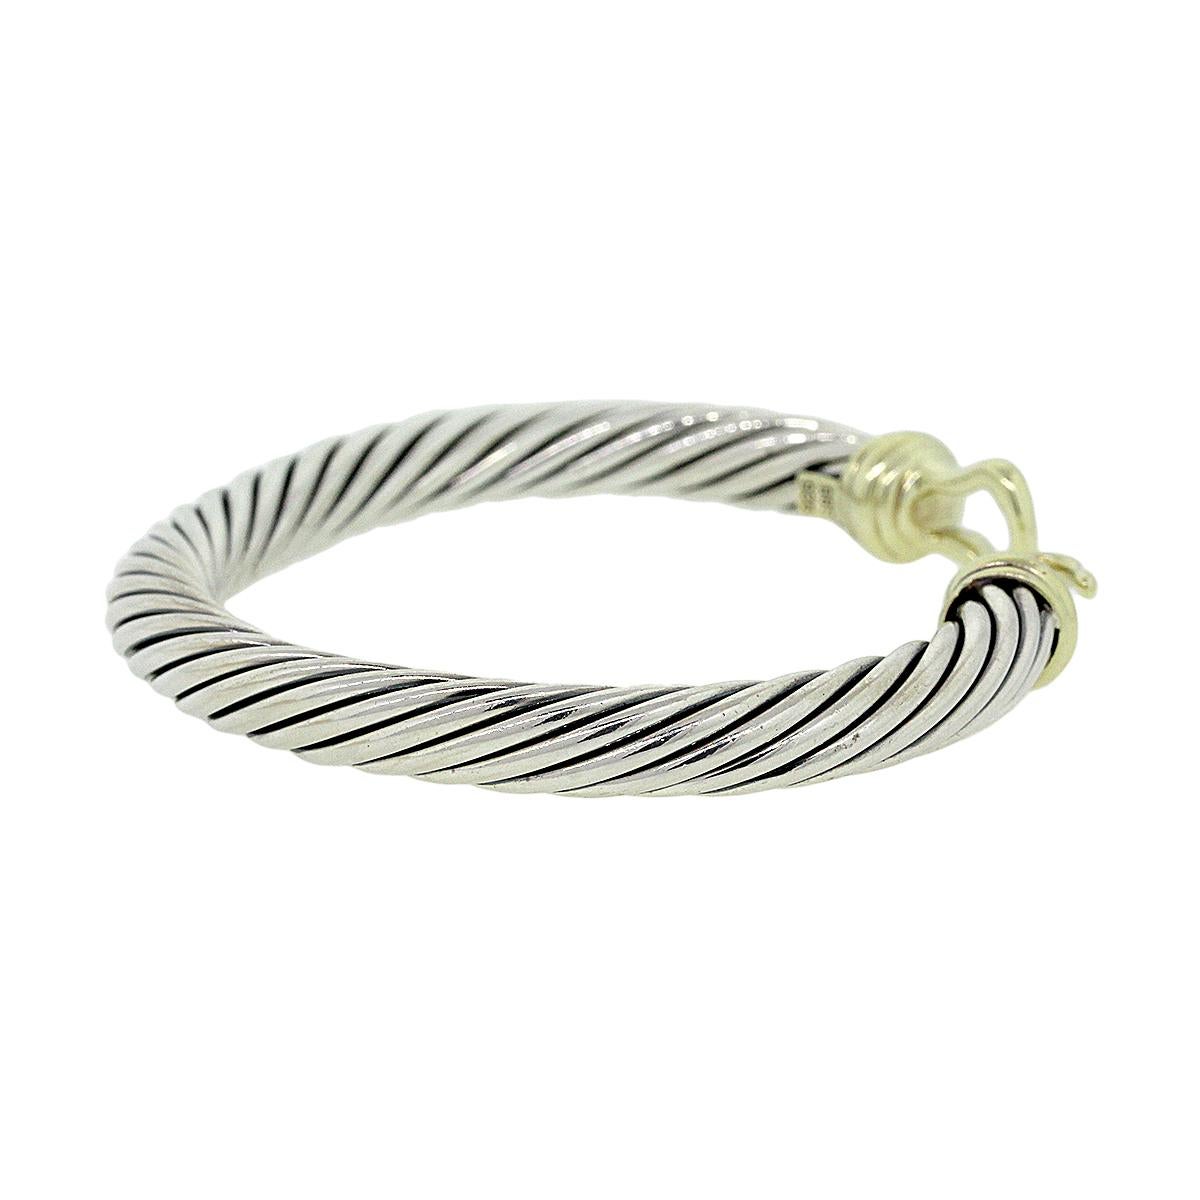 Designer: David Yurman
Material: Sterling silver and 14k yellow gold
Total Weight: 42.6g (27.4dwt)
Bracelet Measurements: Will fit a 6″ Wrist, 7mm in width
SKU: G8005